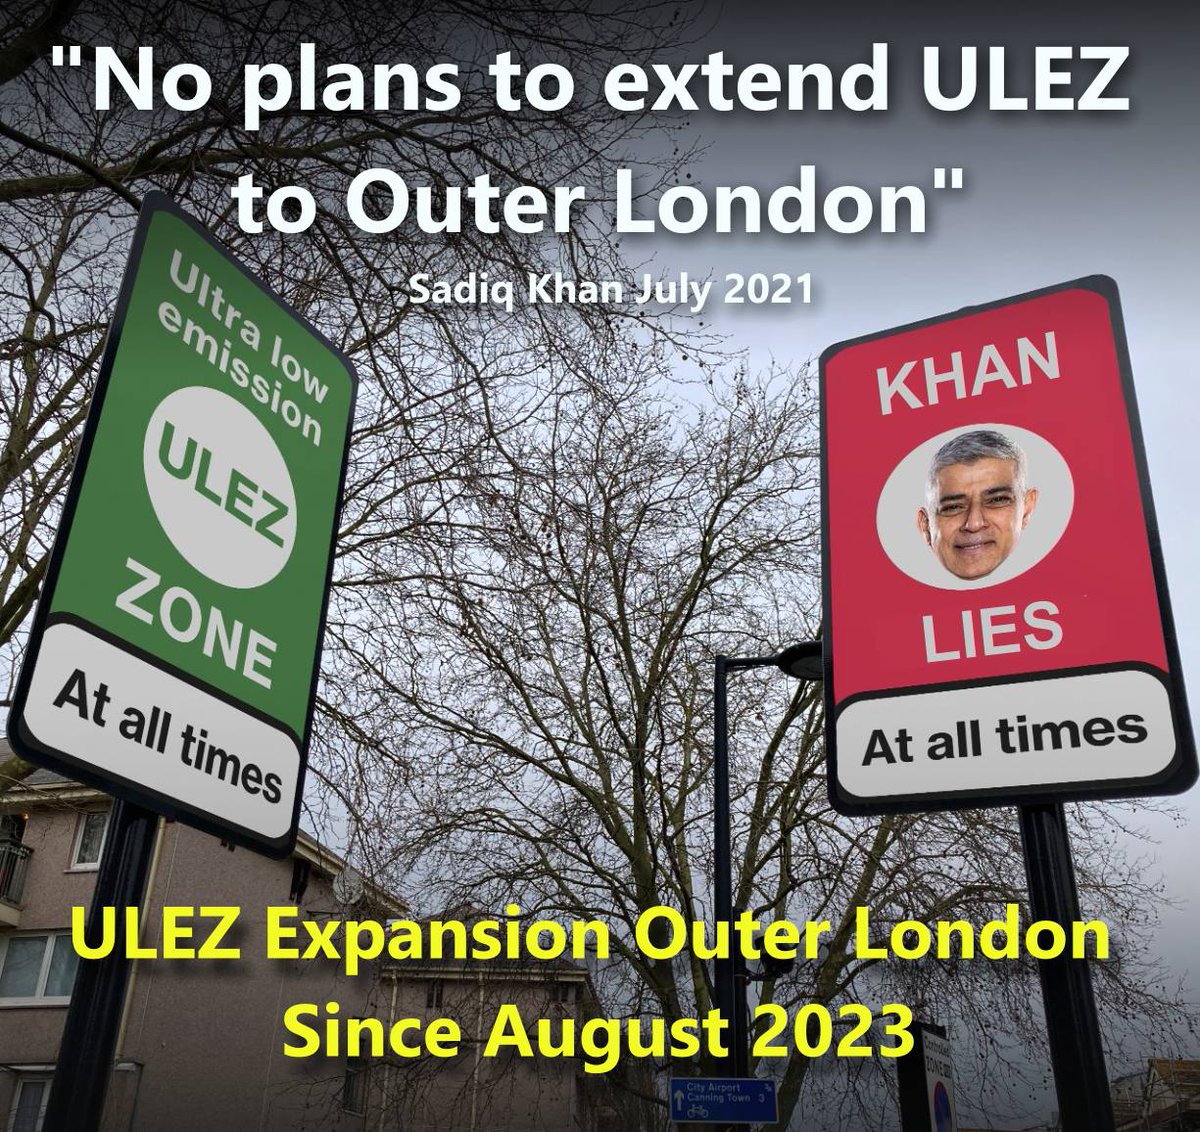 2nd May is your chance to get #KhanOut and vote for @Councillorsuzie who will scrap the #ULEZ expansion in Outer London.